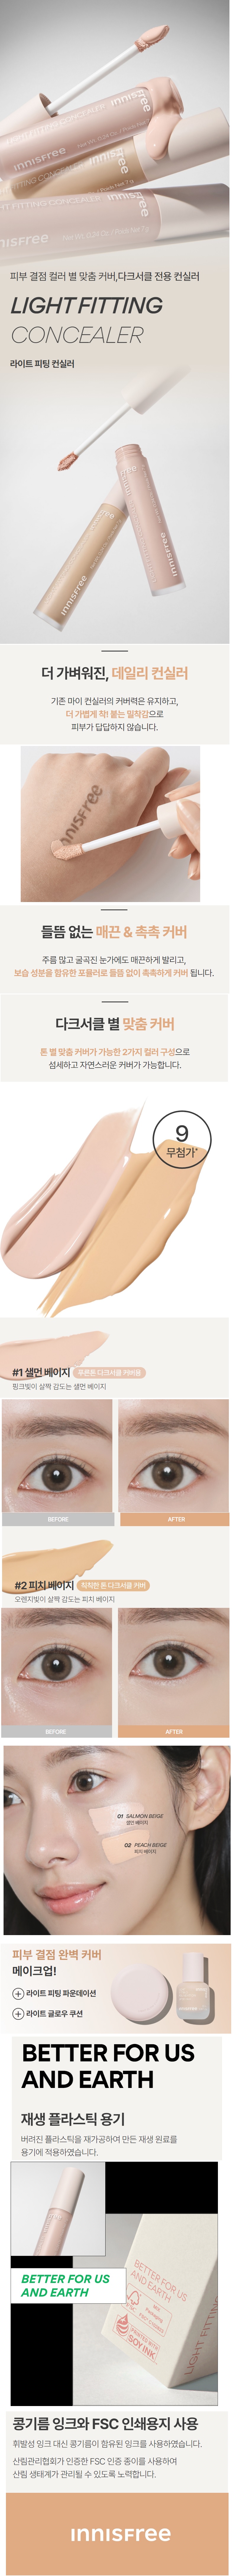 Innisfree Light Fitting Concealer korean skincare product online shop malaysia mexico poland1